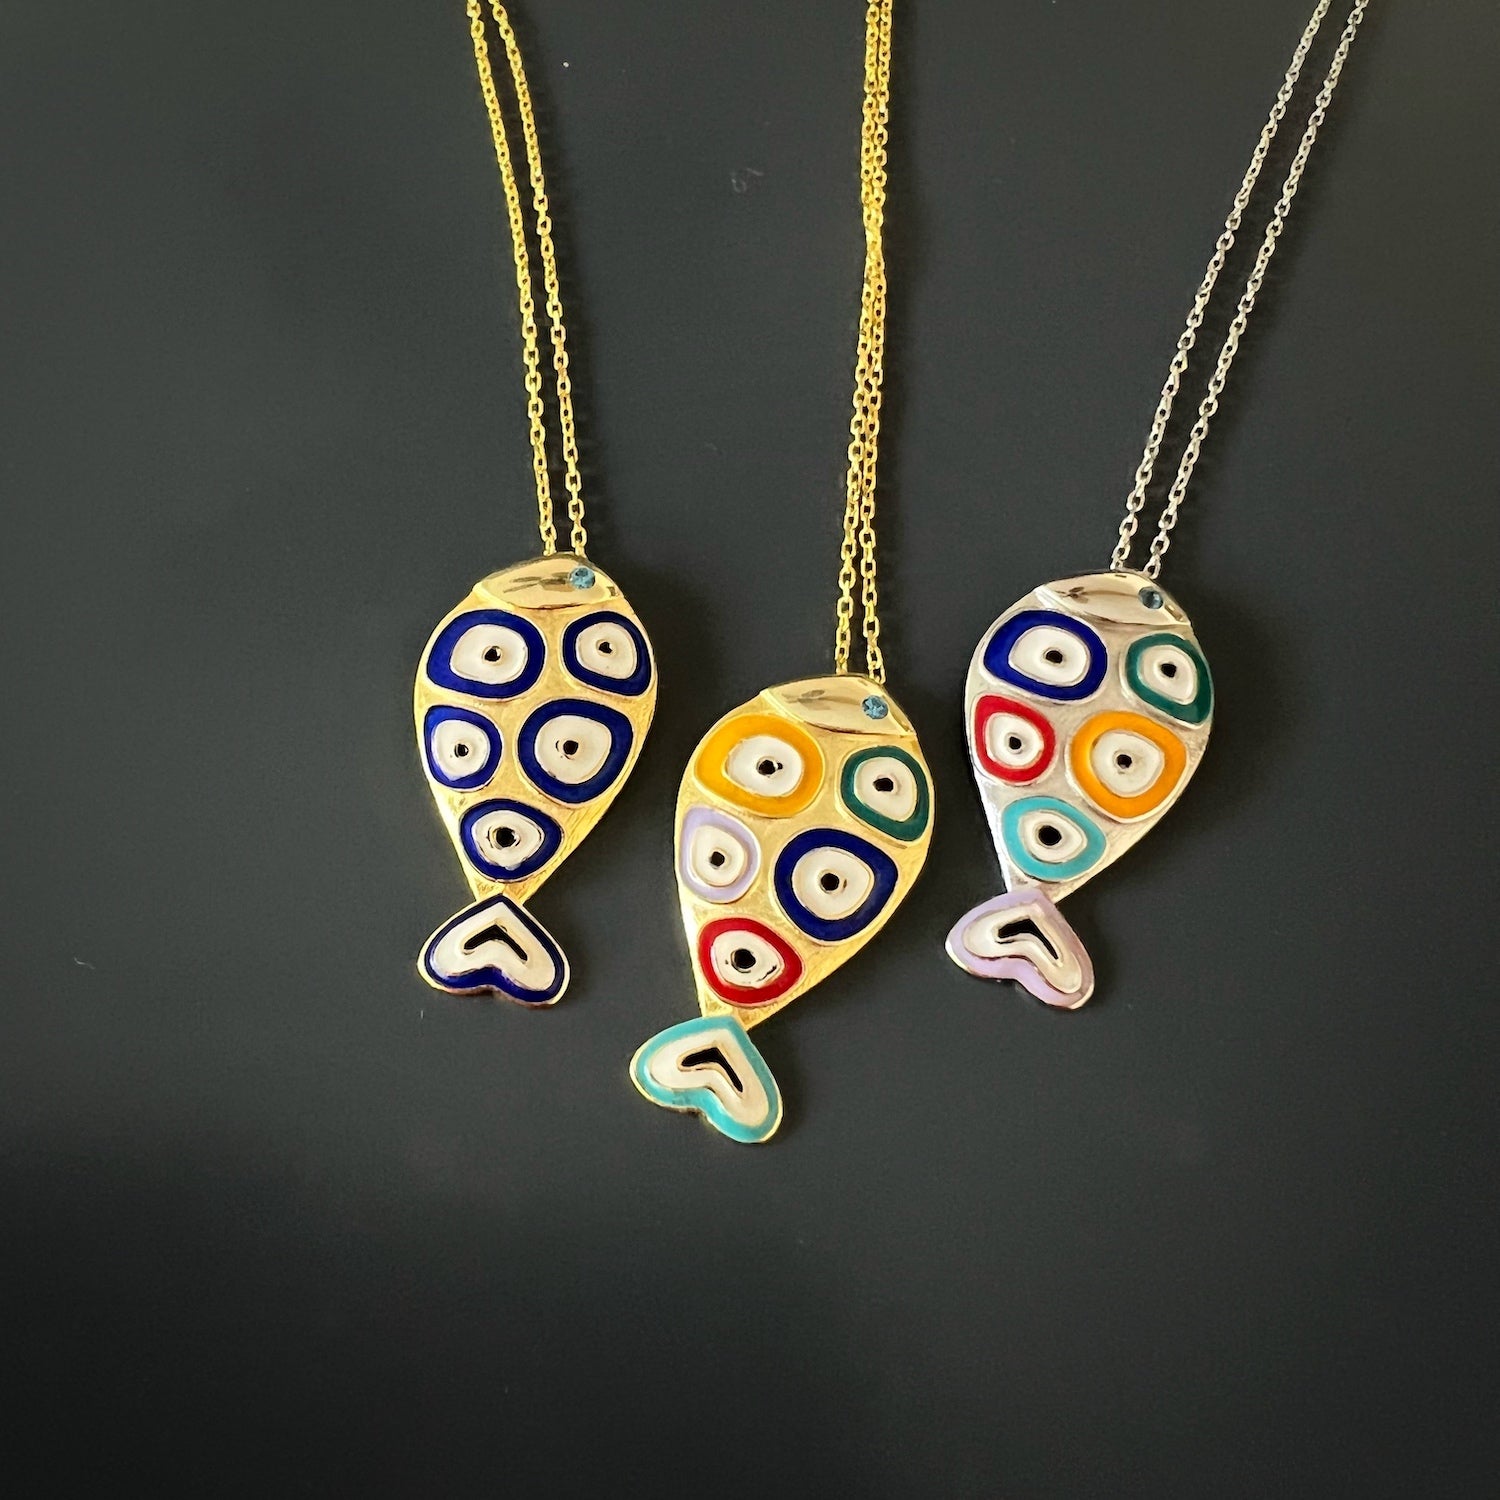 Gold Evil Eye Fish Necklace - Unique accessory featuring a gold plated fish pendant with blue enamel, accented by intricate evil eye motifs, offering both style and spiritual significance.